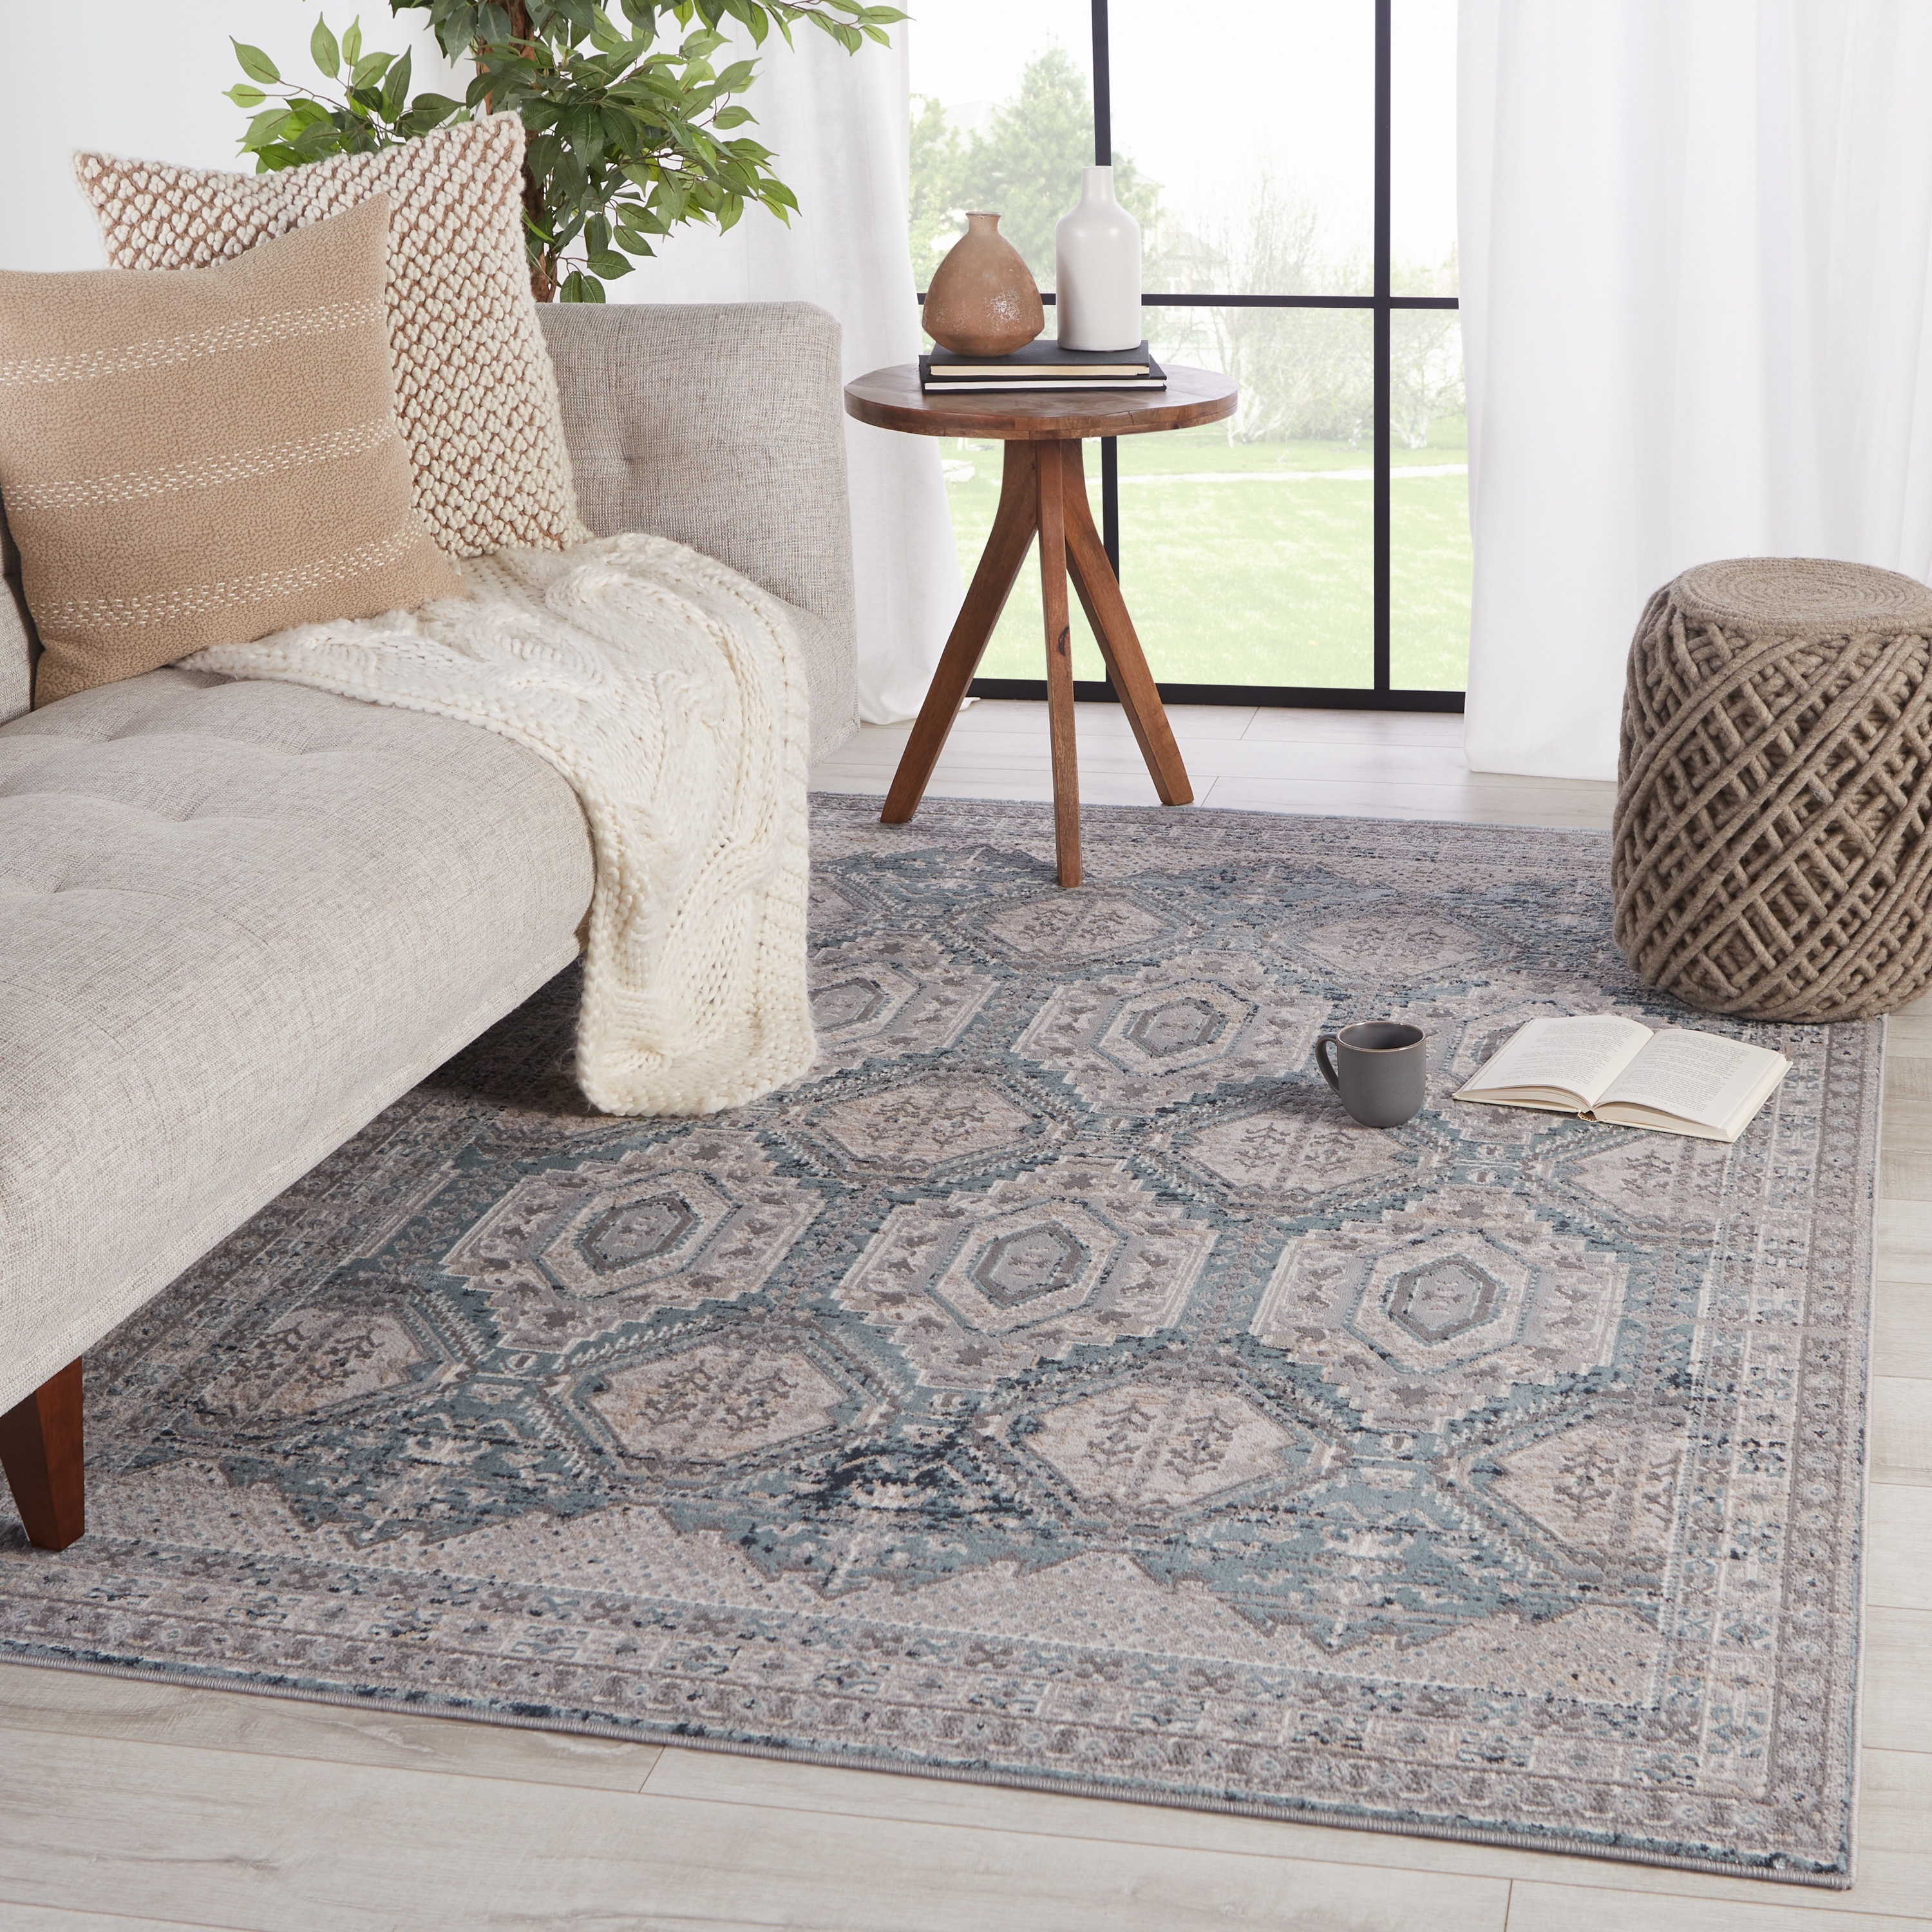 Vibe by Cabazon Trellis Gray/ Blue Area Rug (9'X13') - Image 4